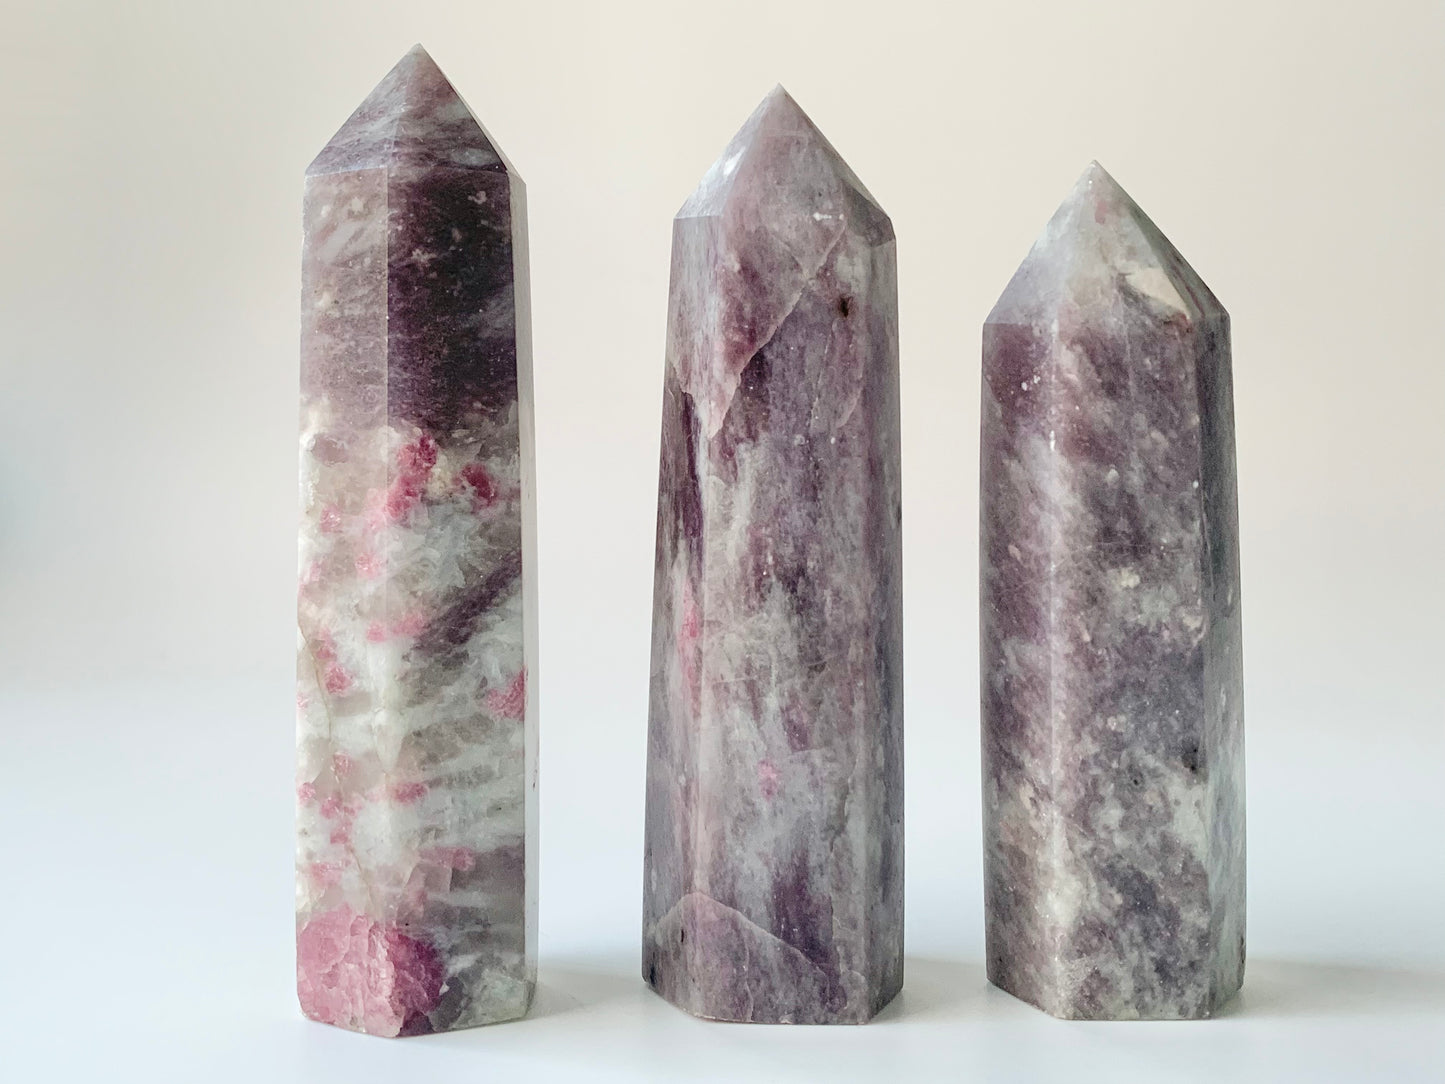 Pink Tourmaline and Lepidolite Towers, $16